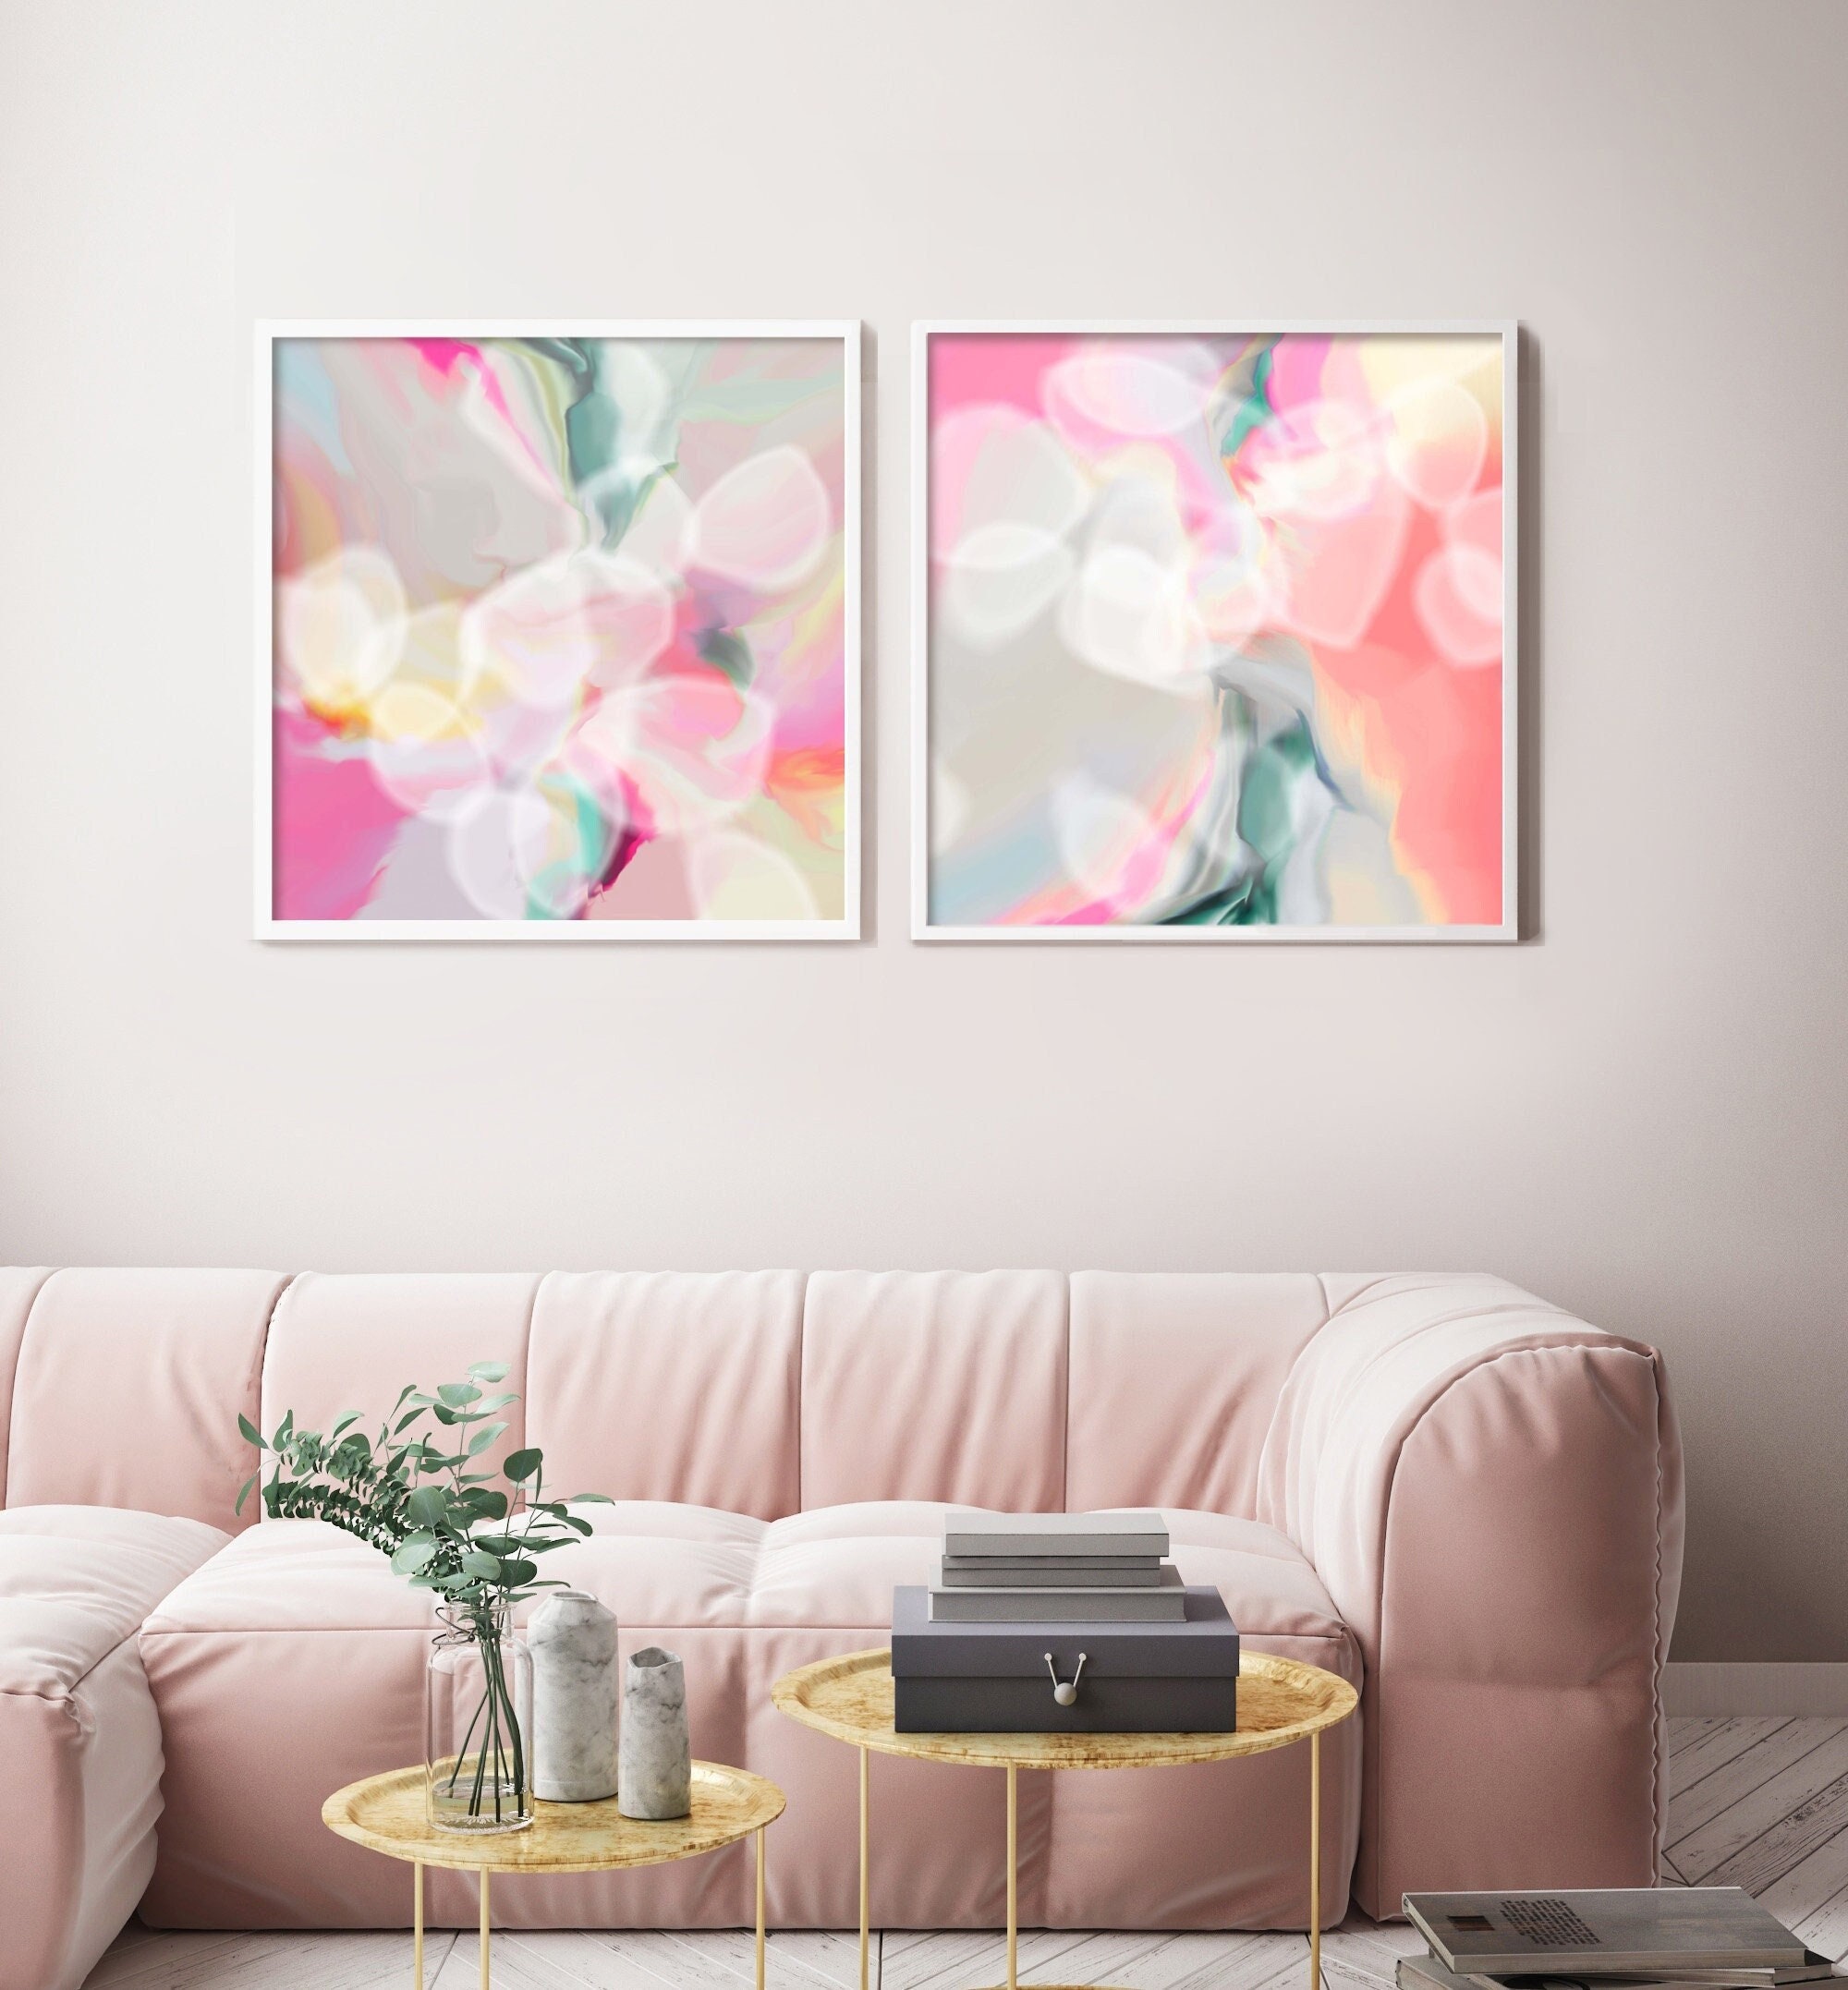 For The Love Of Blush - Pink Interiors In The Home - Arianna's Daily